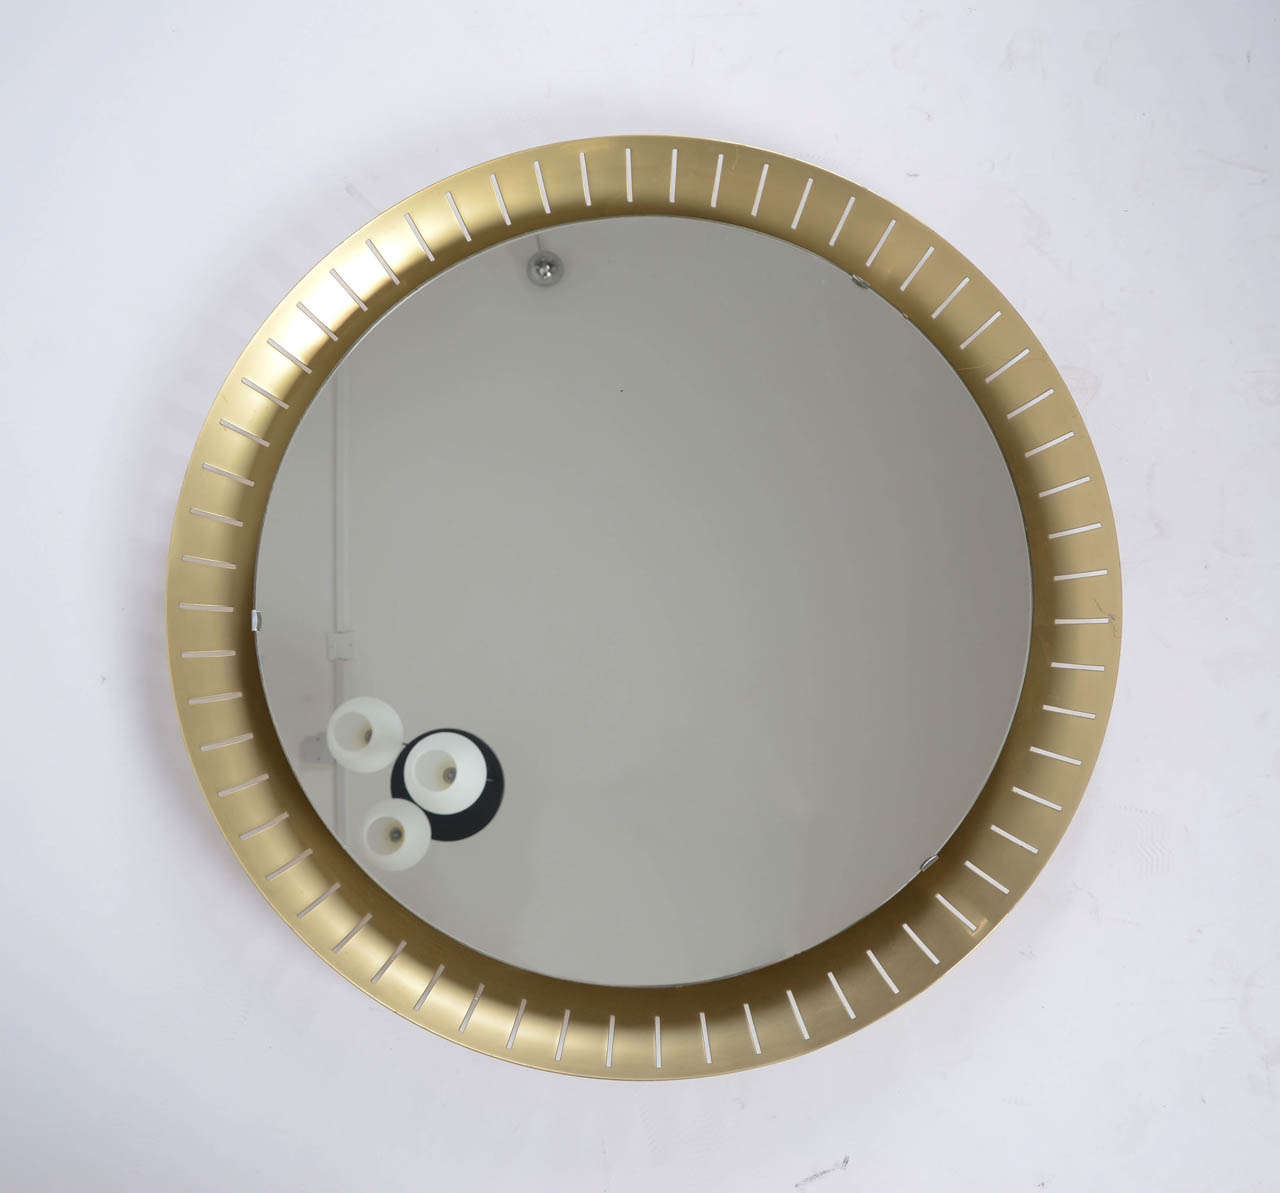 1960's Stilnovo round golded alluminium frame with round mirrored glass and a circle neon light behind the mirror.